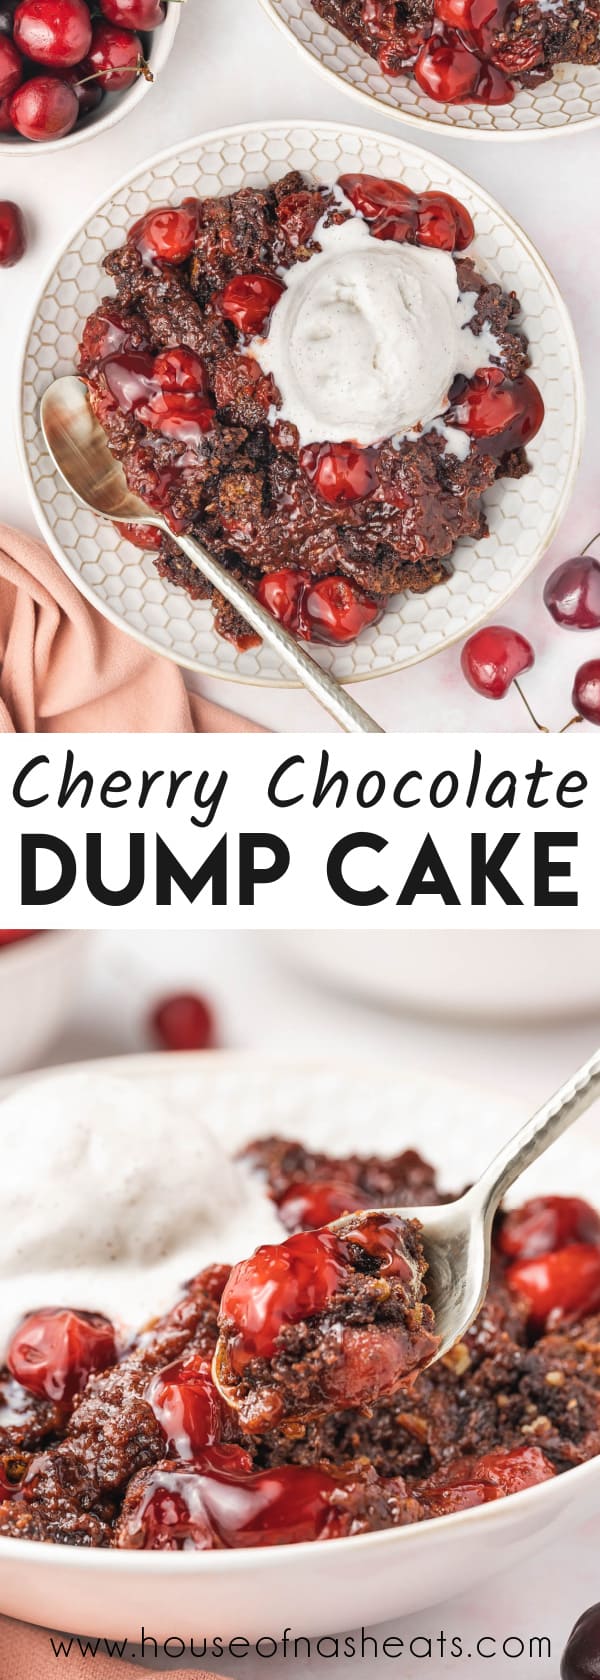 A collage of images of chocolate cherry dump cake with text overlay.